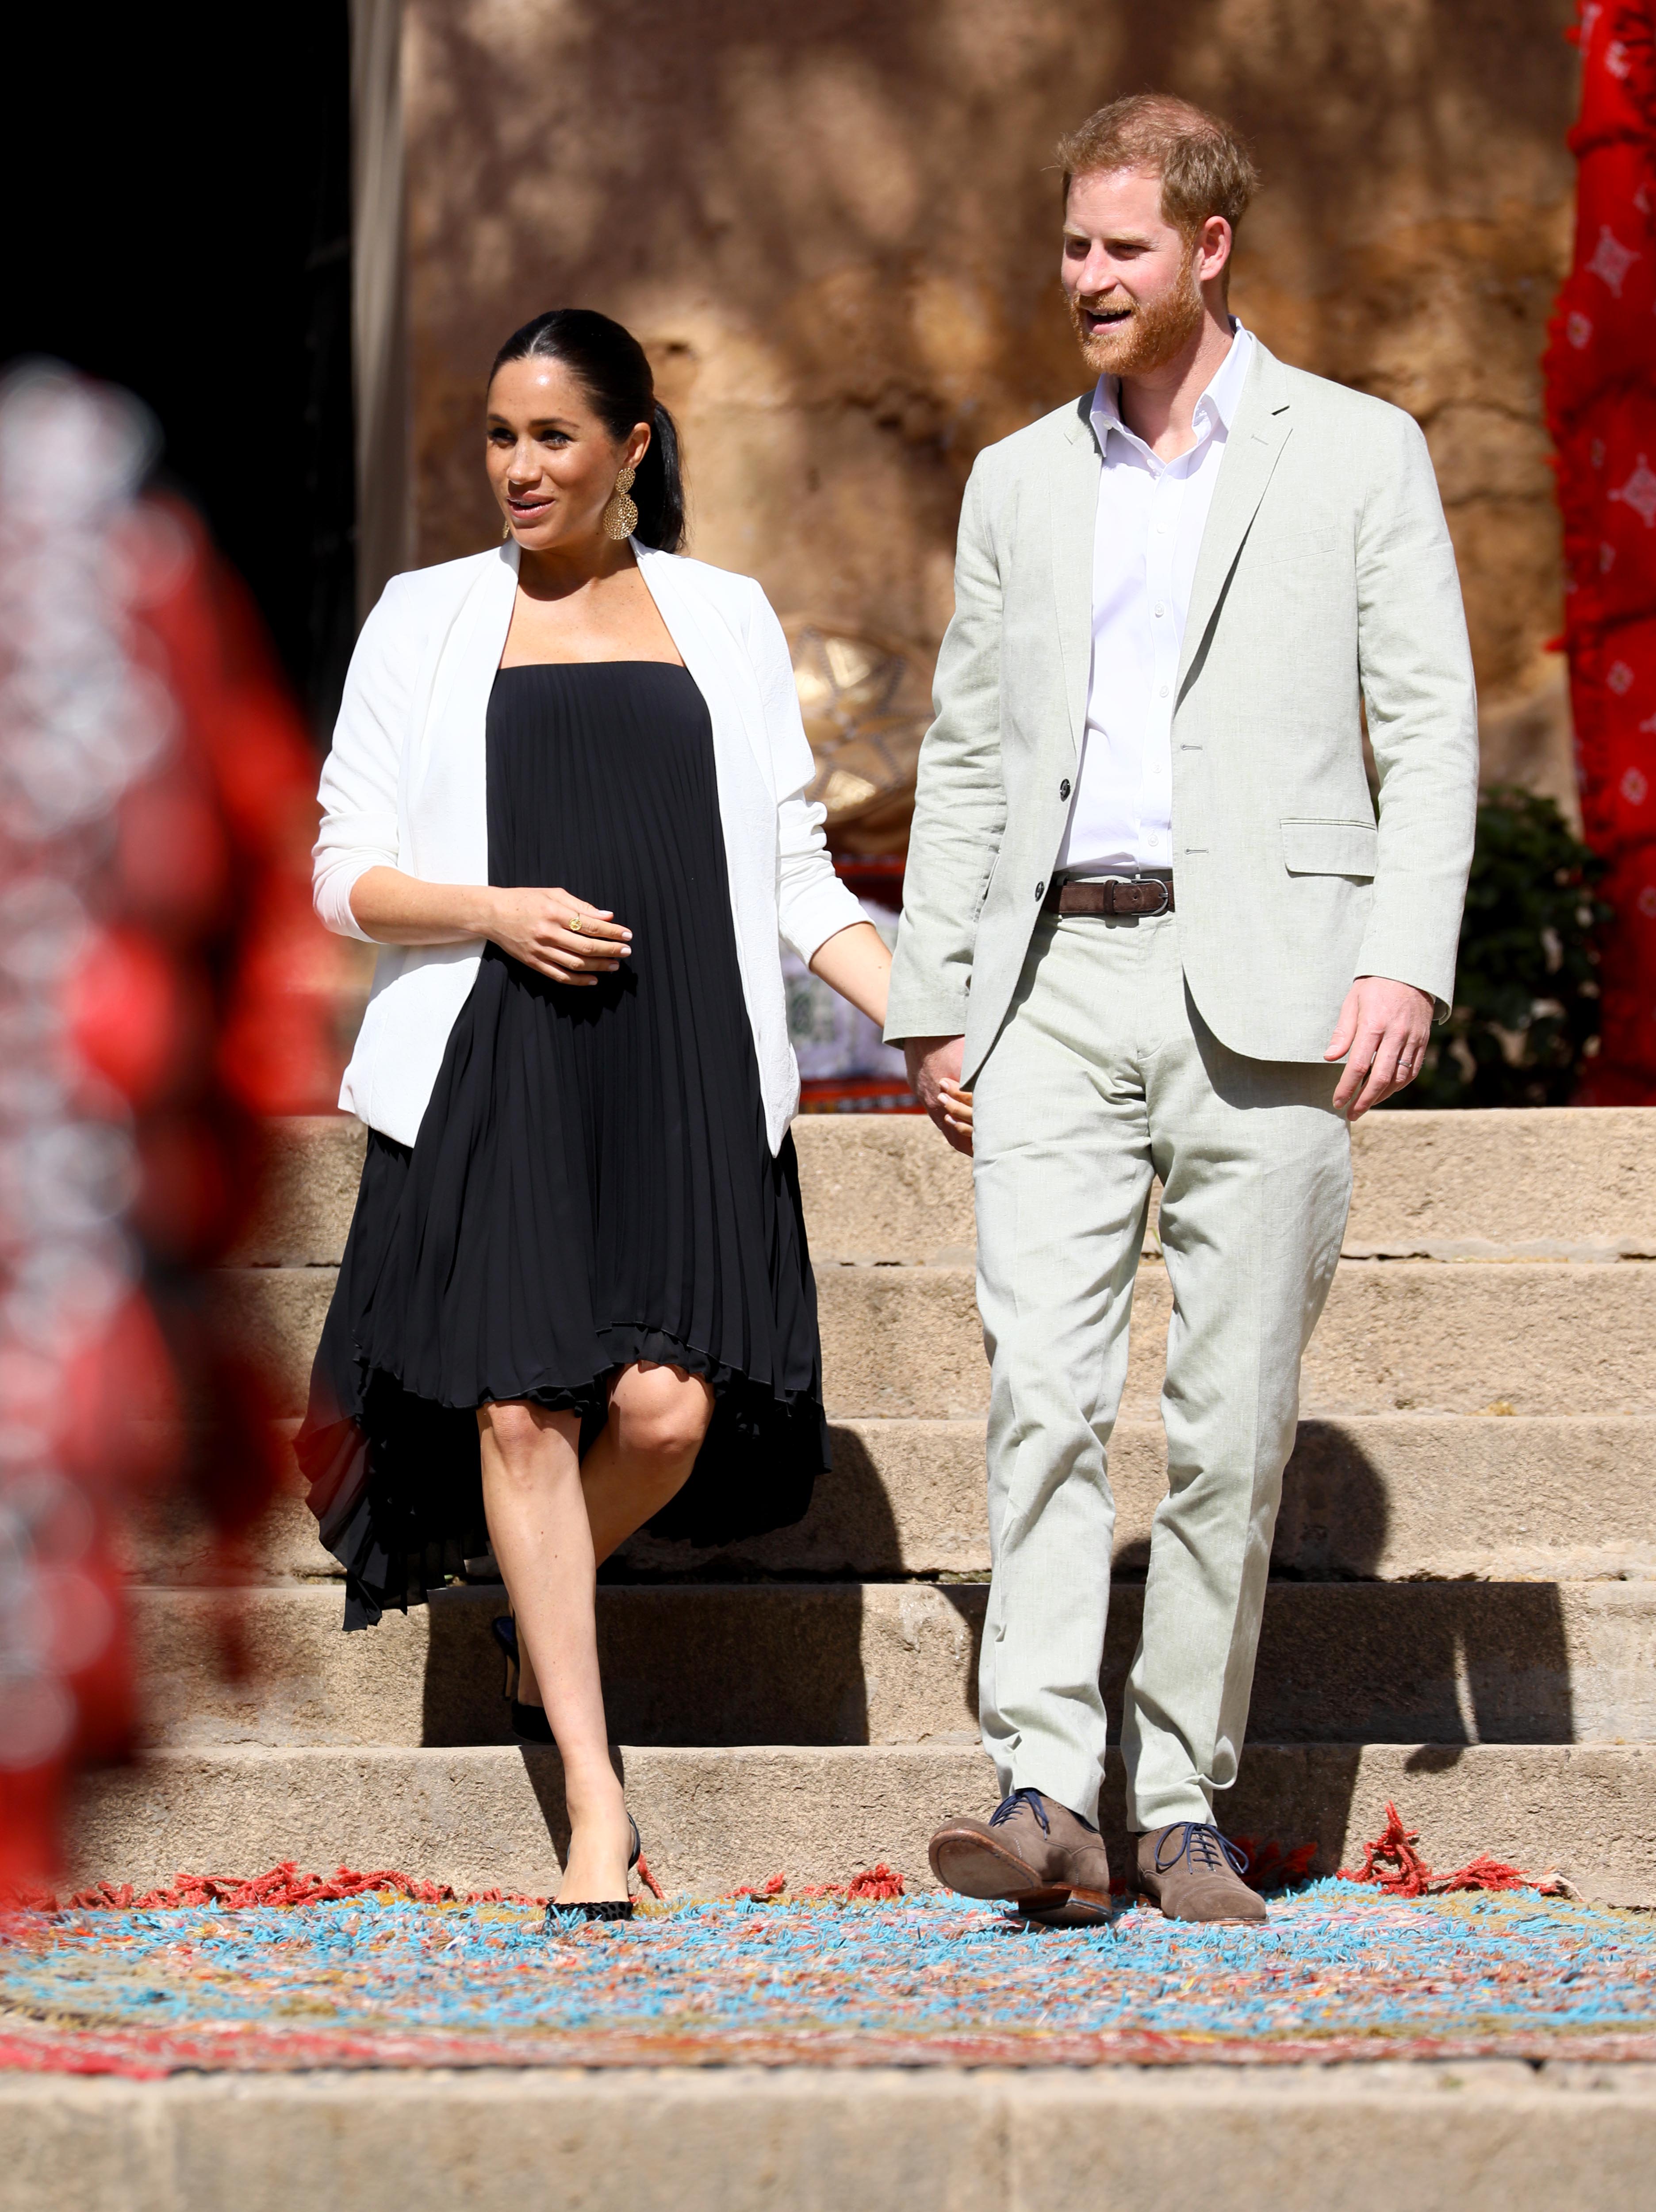  Prince Harry, Duke of Sussex and Meghan, Duchess of Sussex walk through the walled public Andalusian Gardens which has exotic plants, flowers and fruit trees during a visit on February 25, 2019 in Rabat, Morocco. | Source: Getty Images